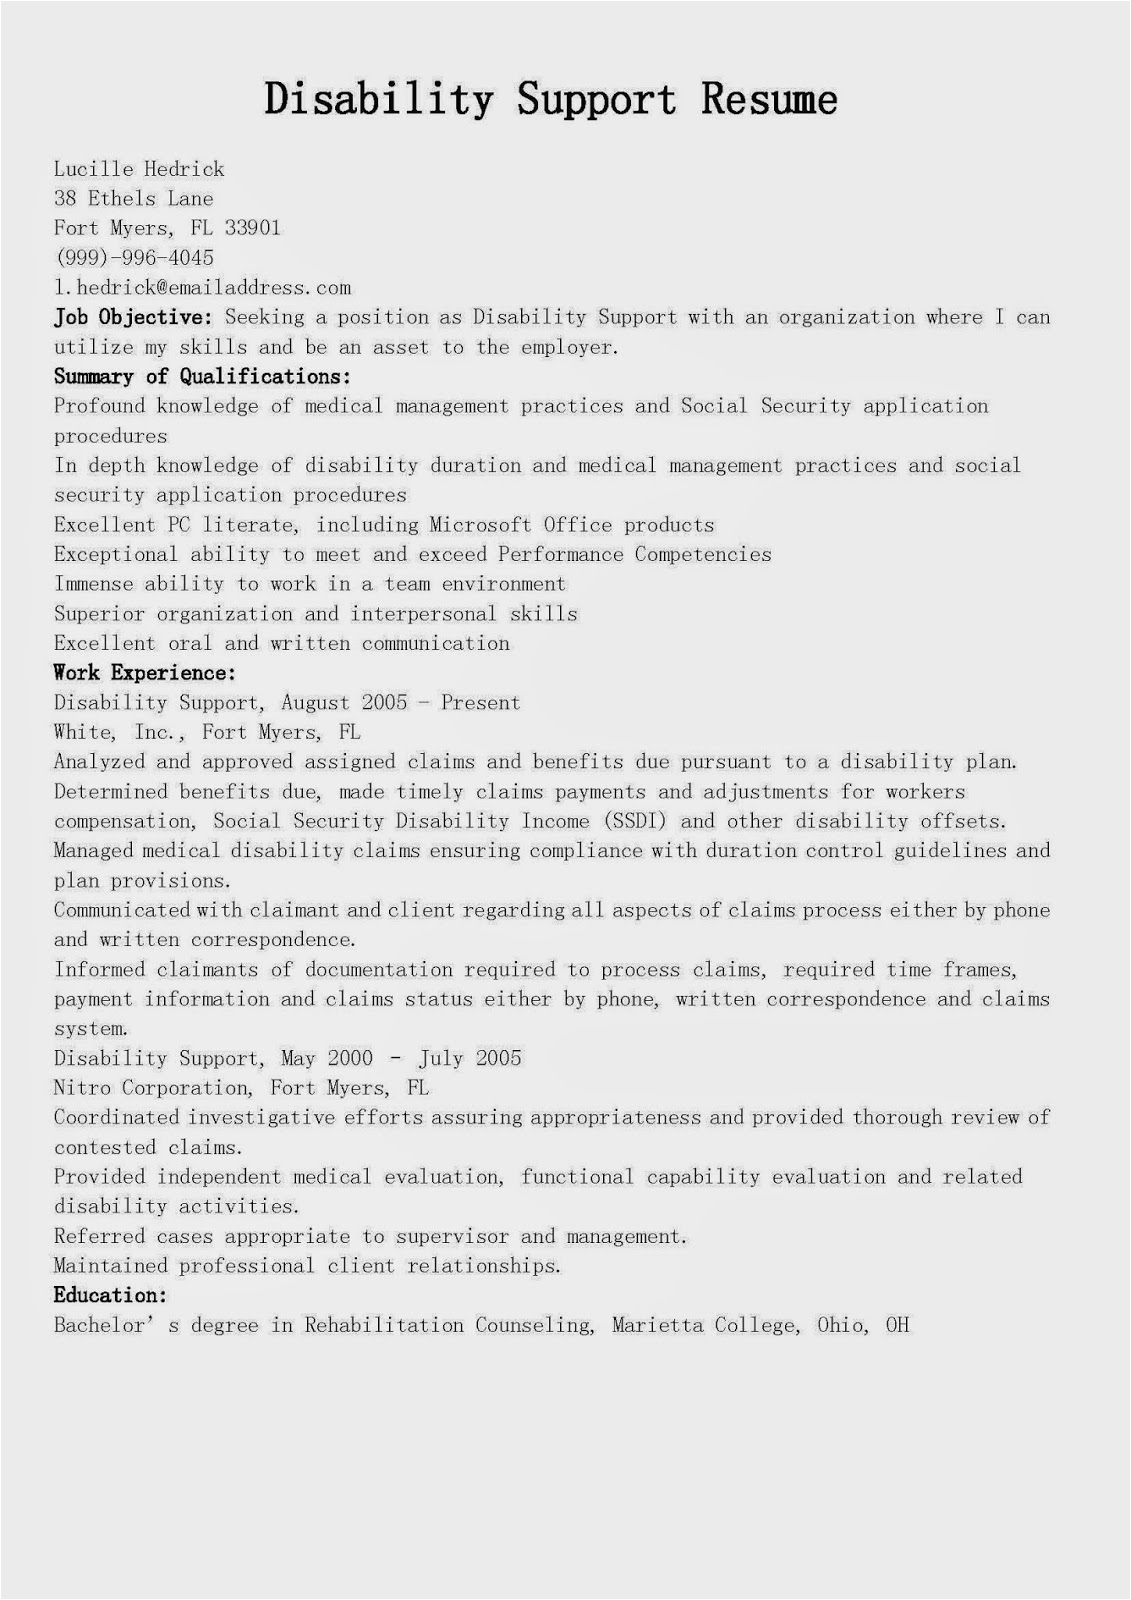 Free Sample Resume for Disability Support Worker Resume Samples Disability Support Resume Sample